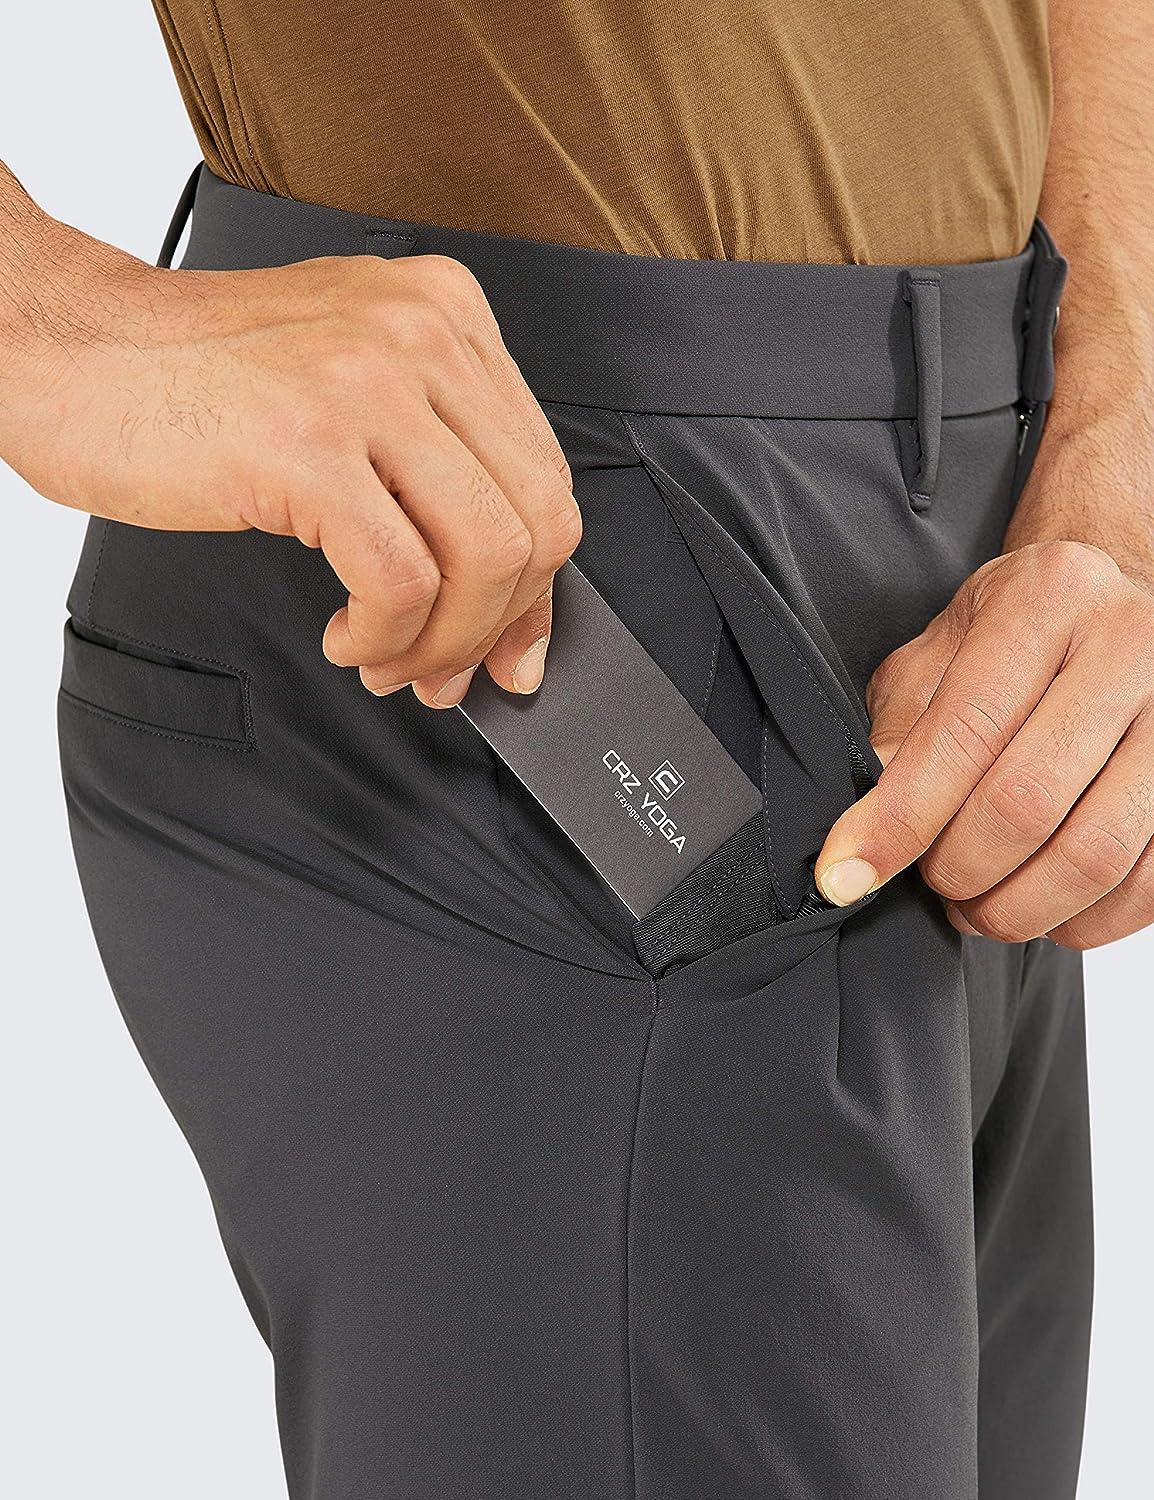  CRZ YOGA Mens Stretch Golf Pants - 35 Slim Fit Stretch  Waterproof Outdoor Thick Golf Work Pant